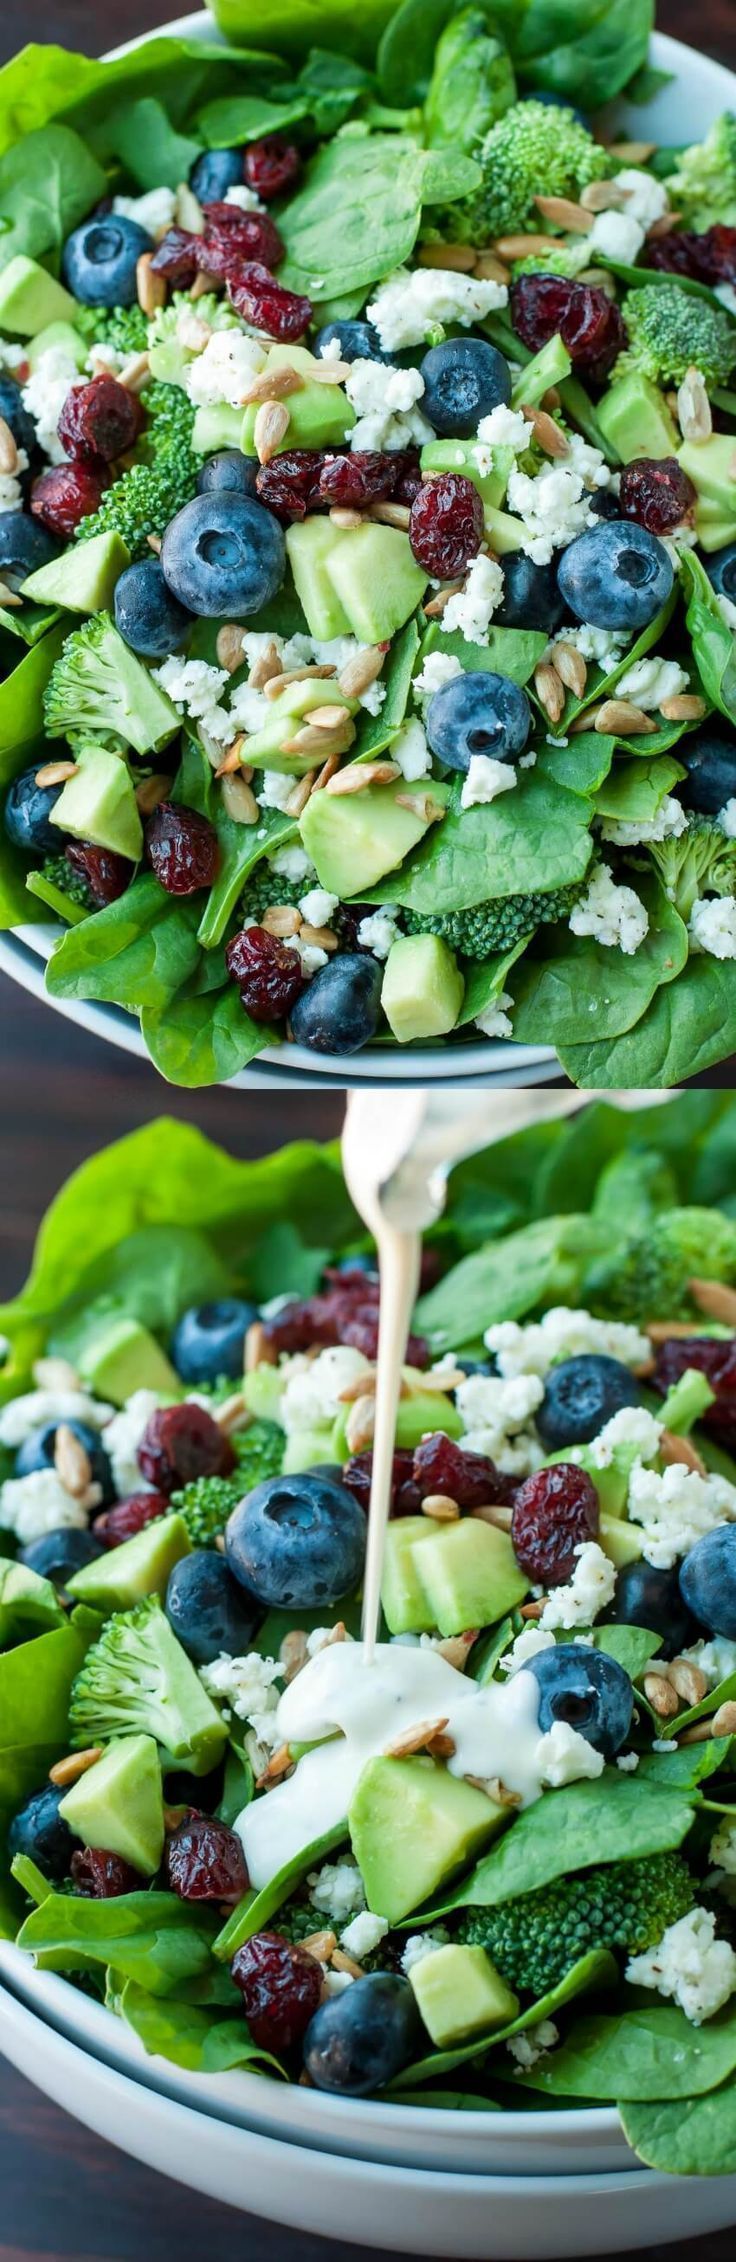 Channeling the flavors of some of some of my favorite restaurant salads, this tasty Blueberry Broccoli Spinach Salad with